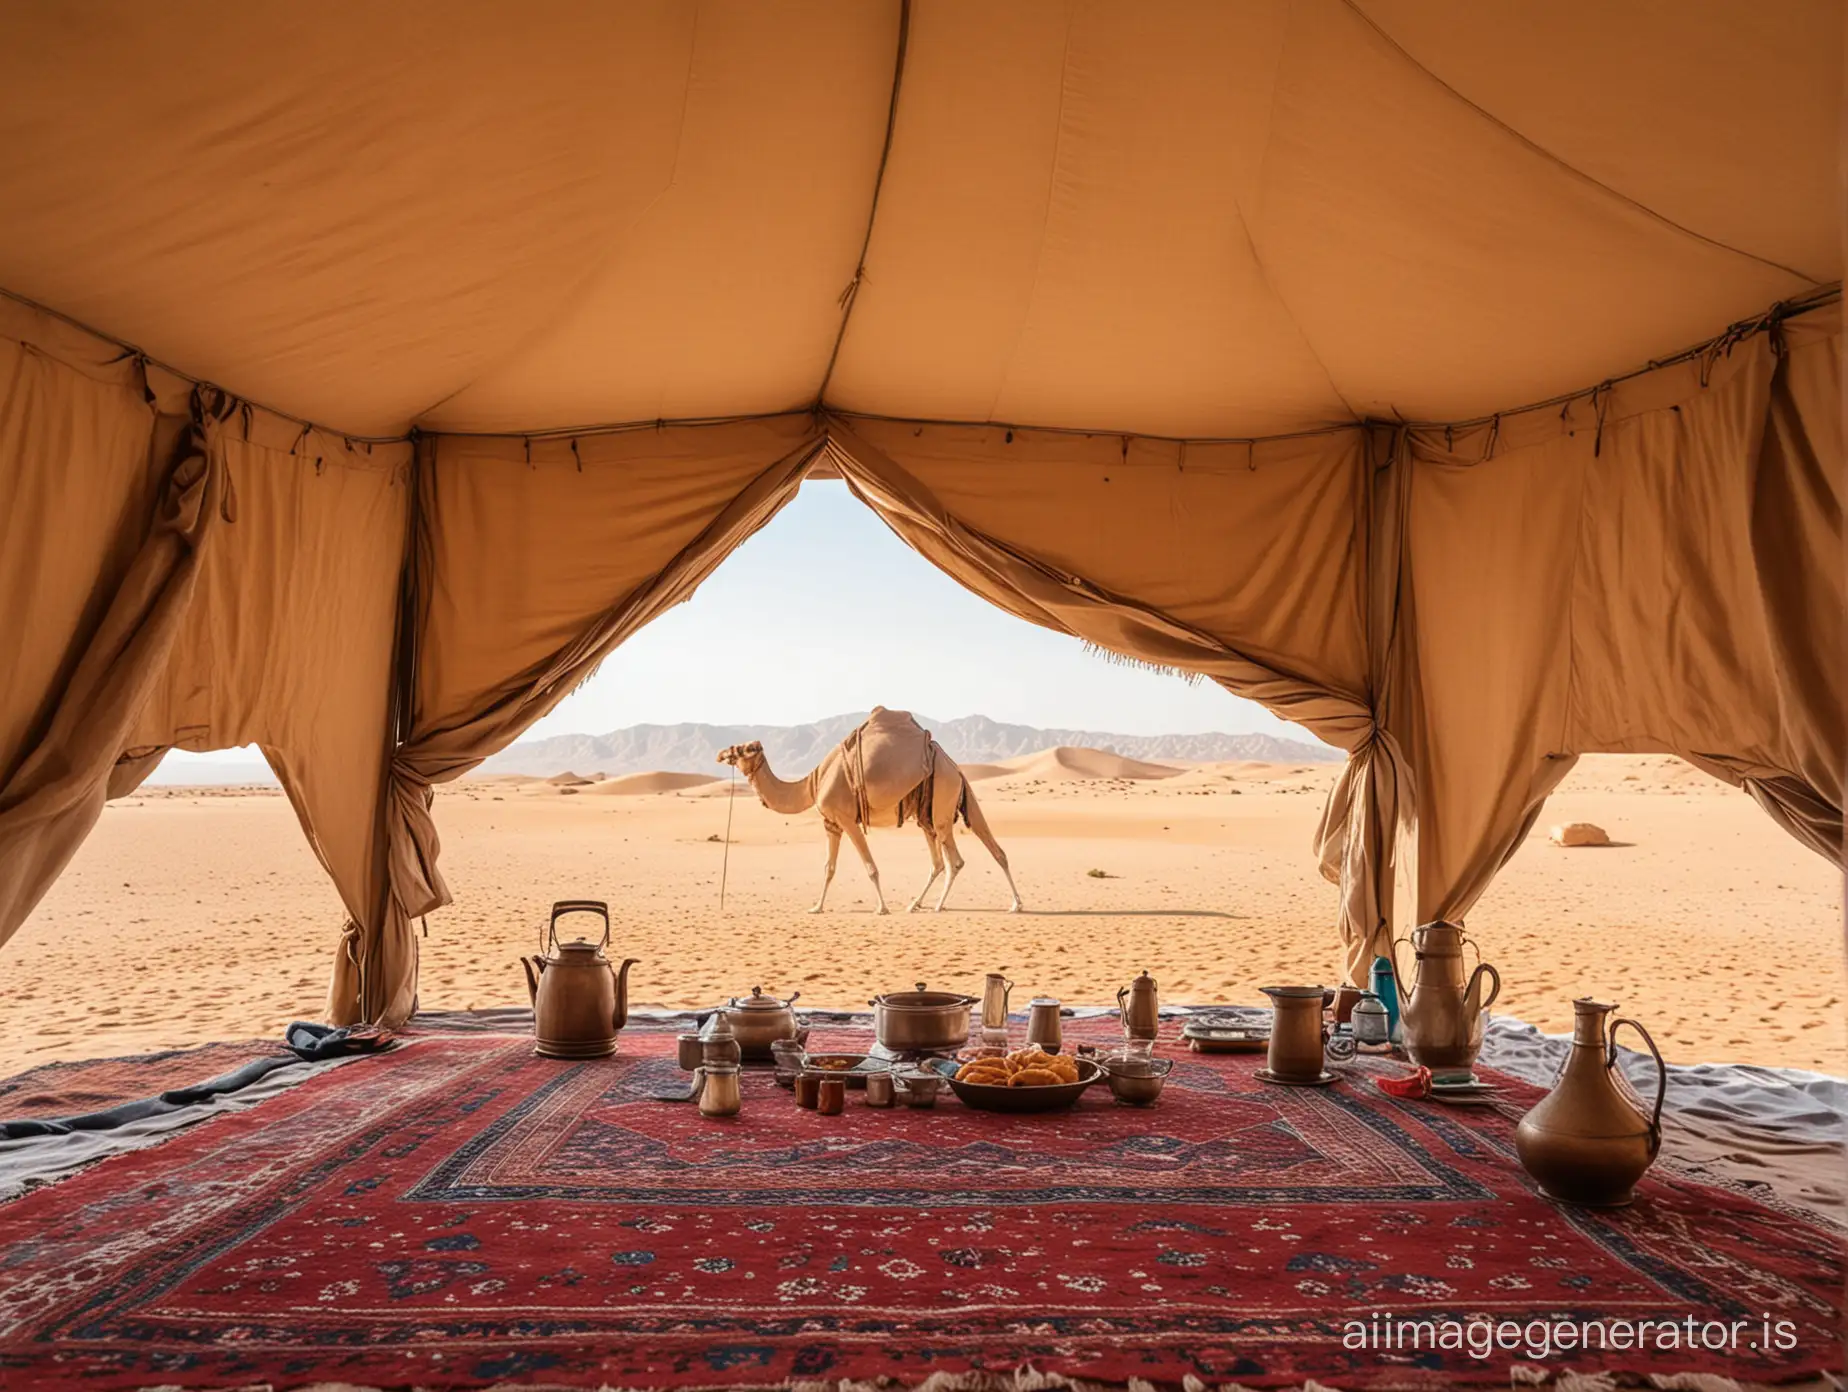 Ramadan-Kareem-Morning-Lunchtime-in-a-Desert-Paradise-with-an-Old-Tent-and-Camel